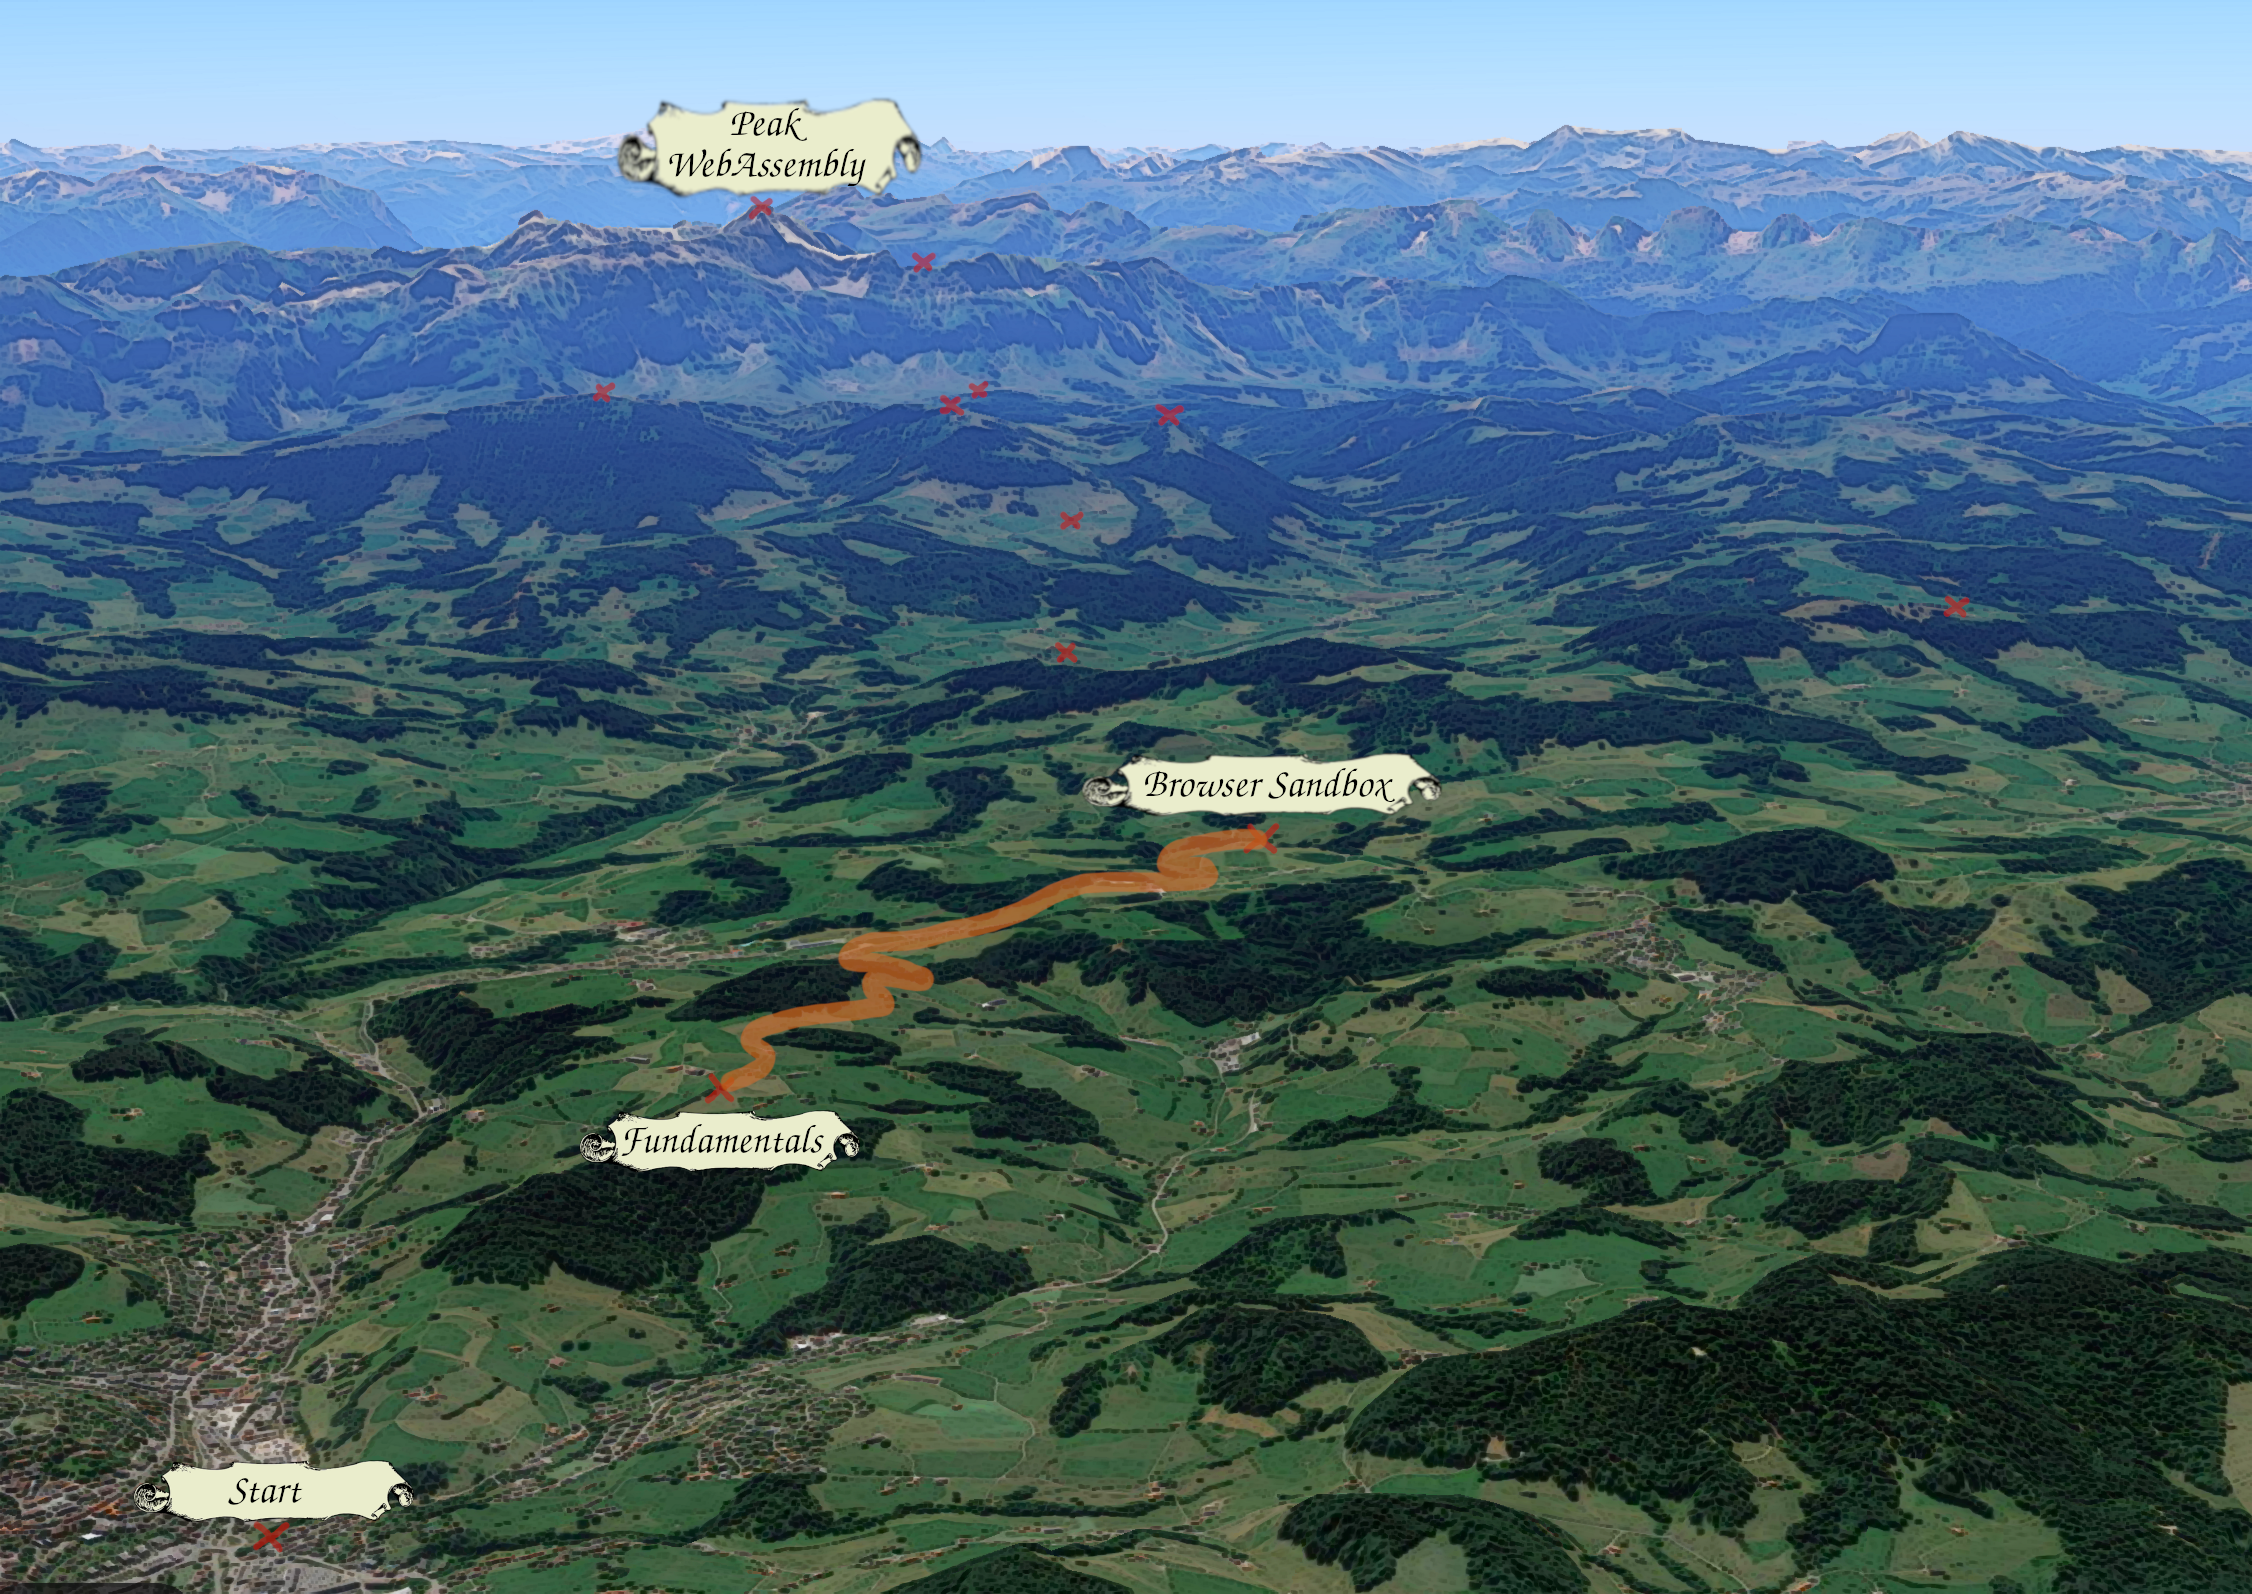 a map showing a hiking path over hills, getting closer to a mountain labeled "Peak WebAssembly"